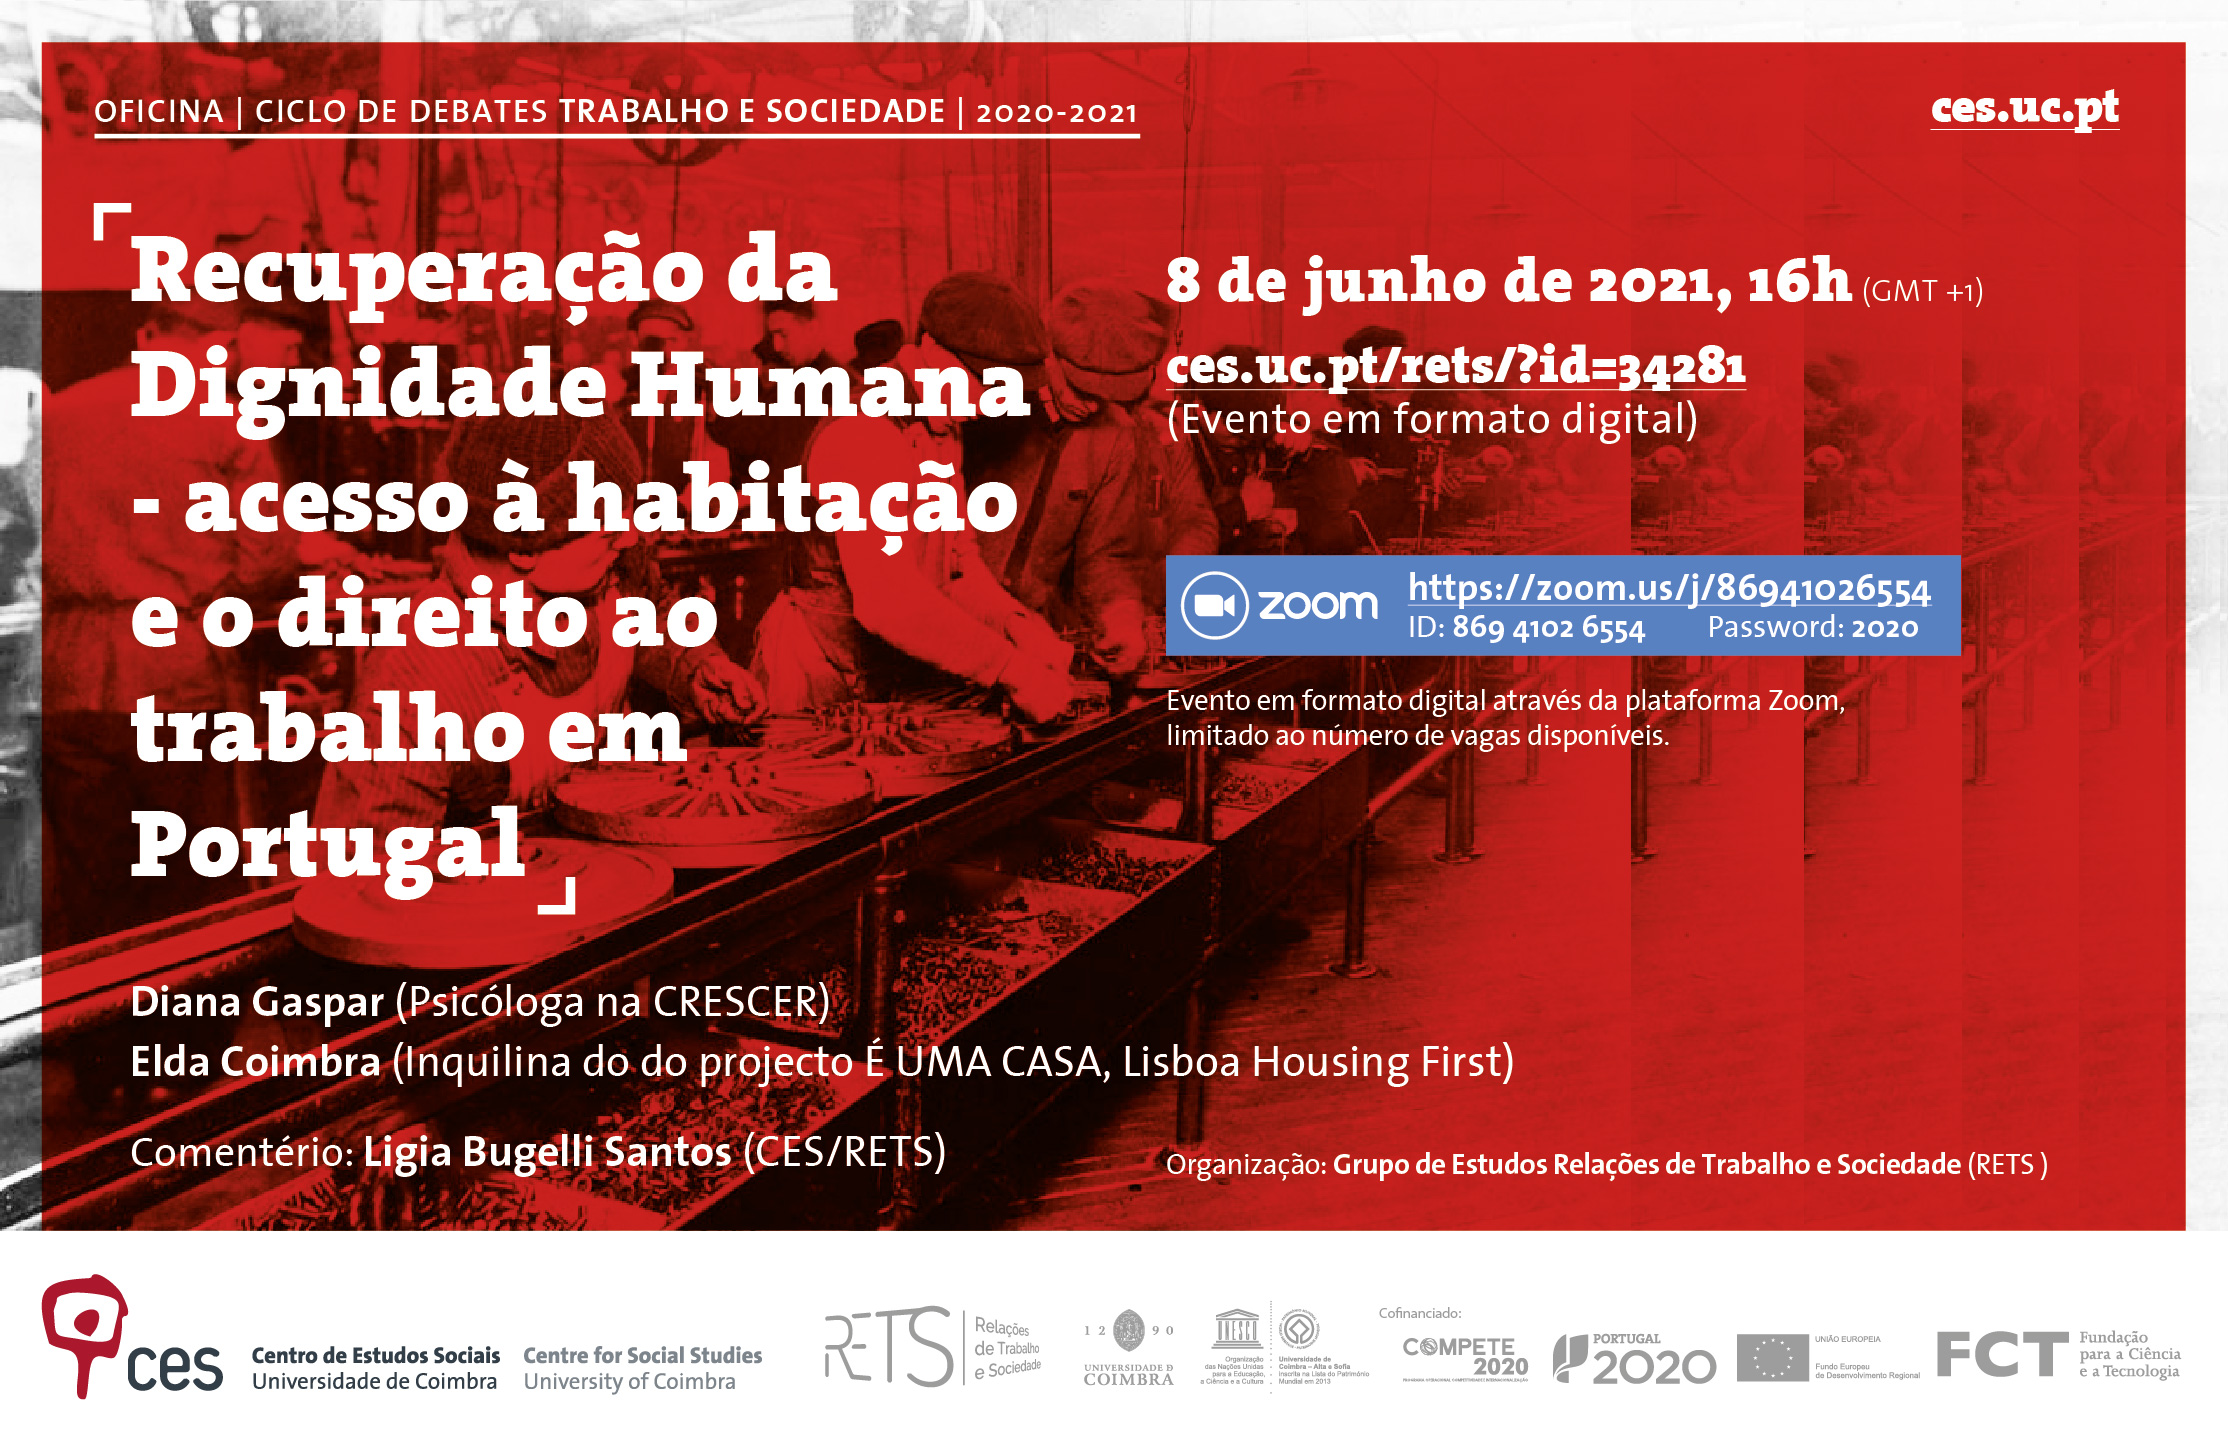 Recovering Human Dignity - access to housing and the right to work in Portugal<span id="edit_34281"><script>$(function() { $('#edit_34281').load( "/myces/user/editobj.php?tipo=evento&id=34281" ); });</script></span>